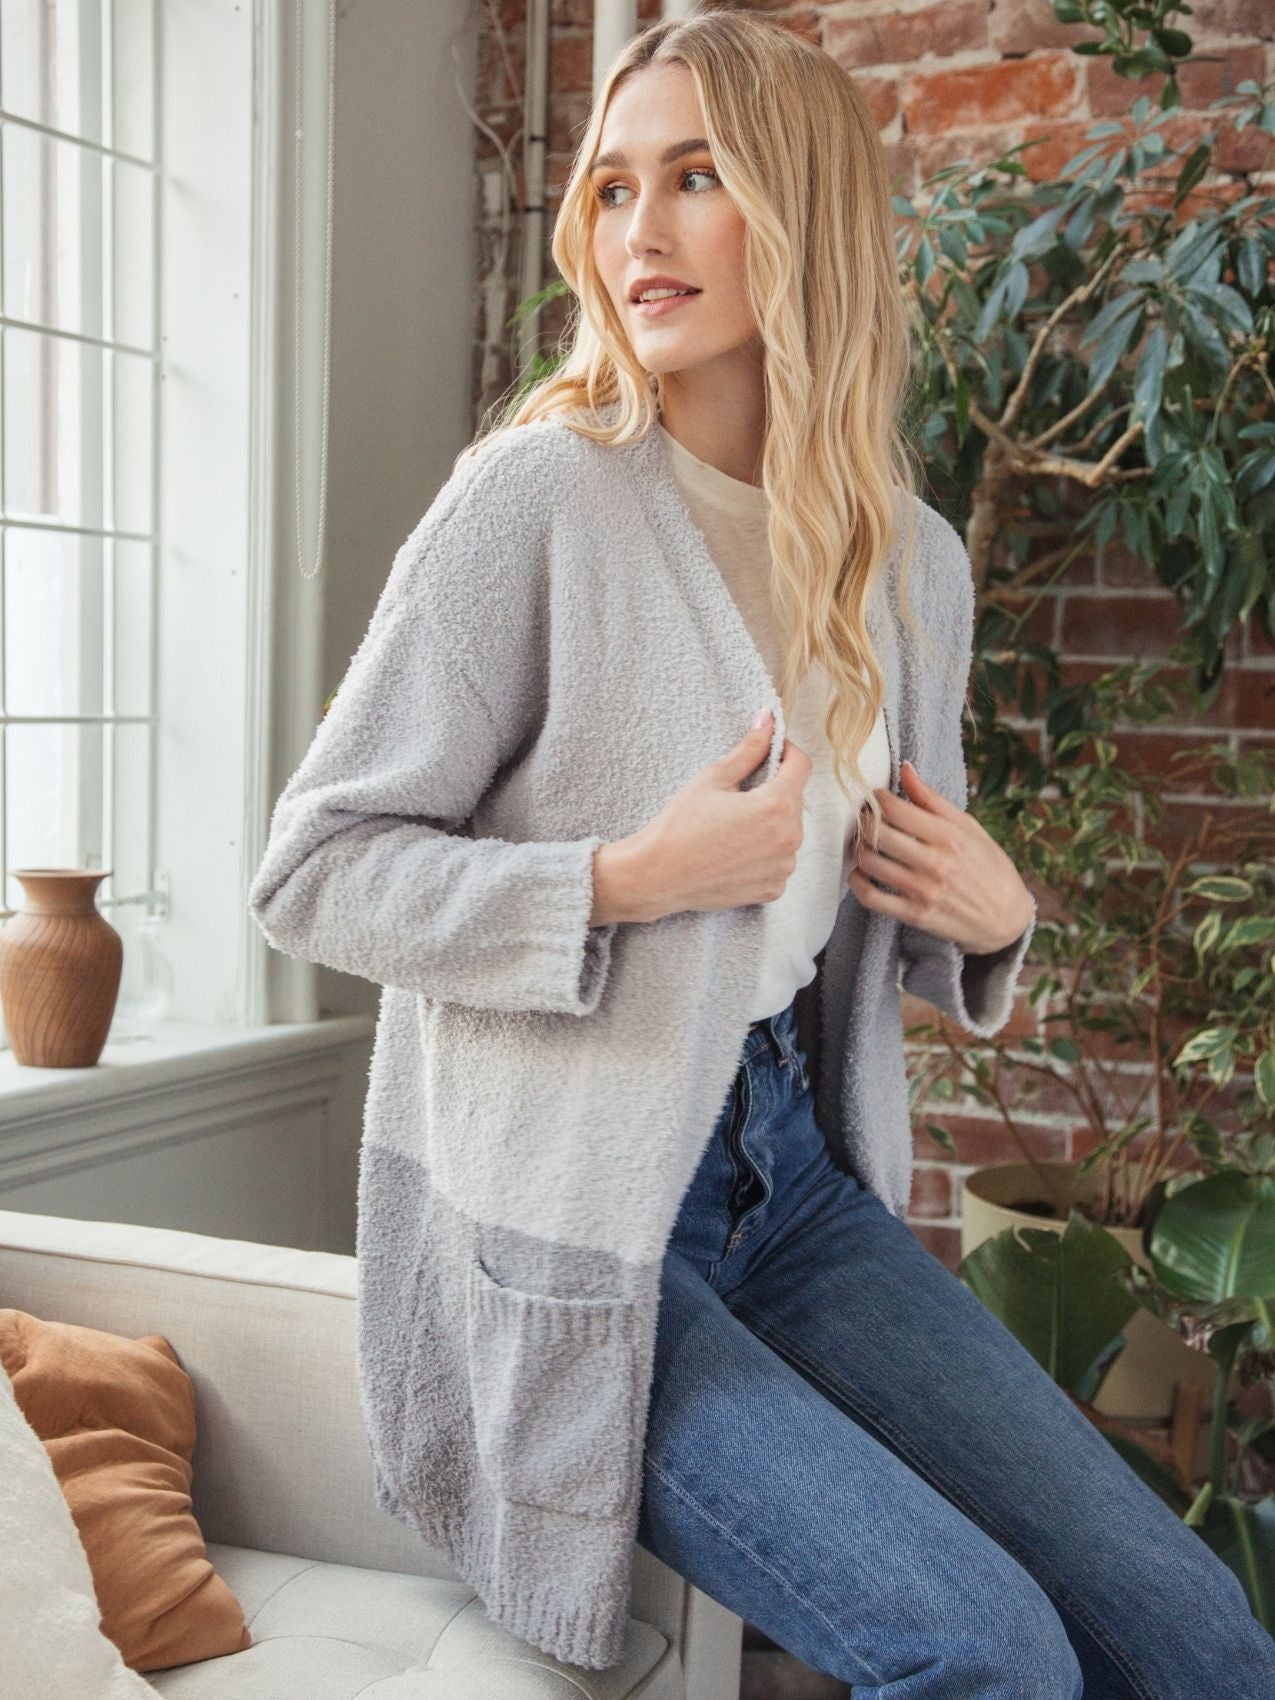 Thread & Supply Color Block Gray Cardigan Size S - 76% off